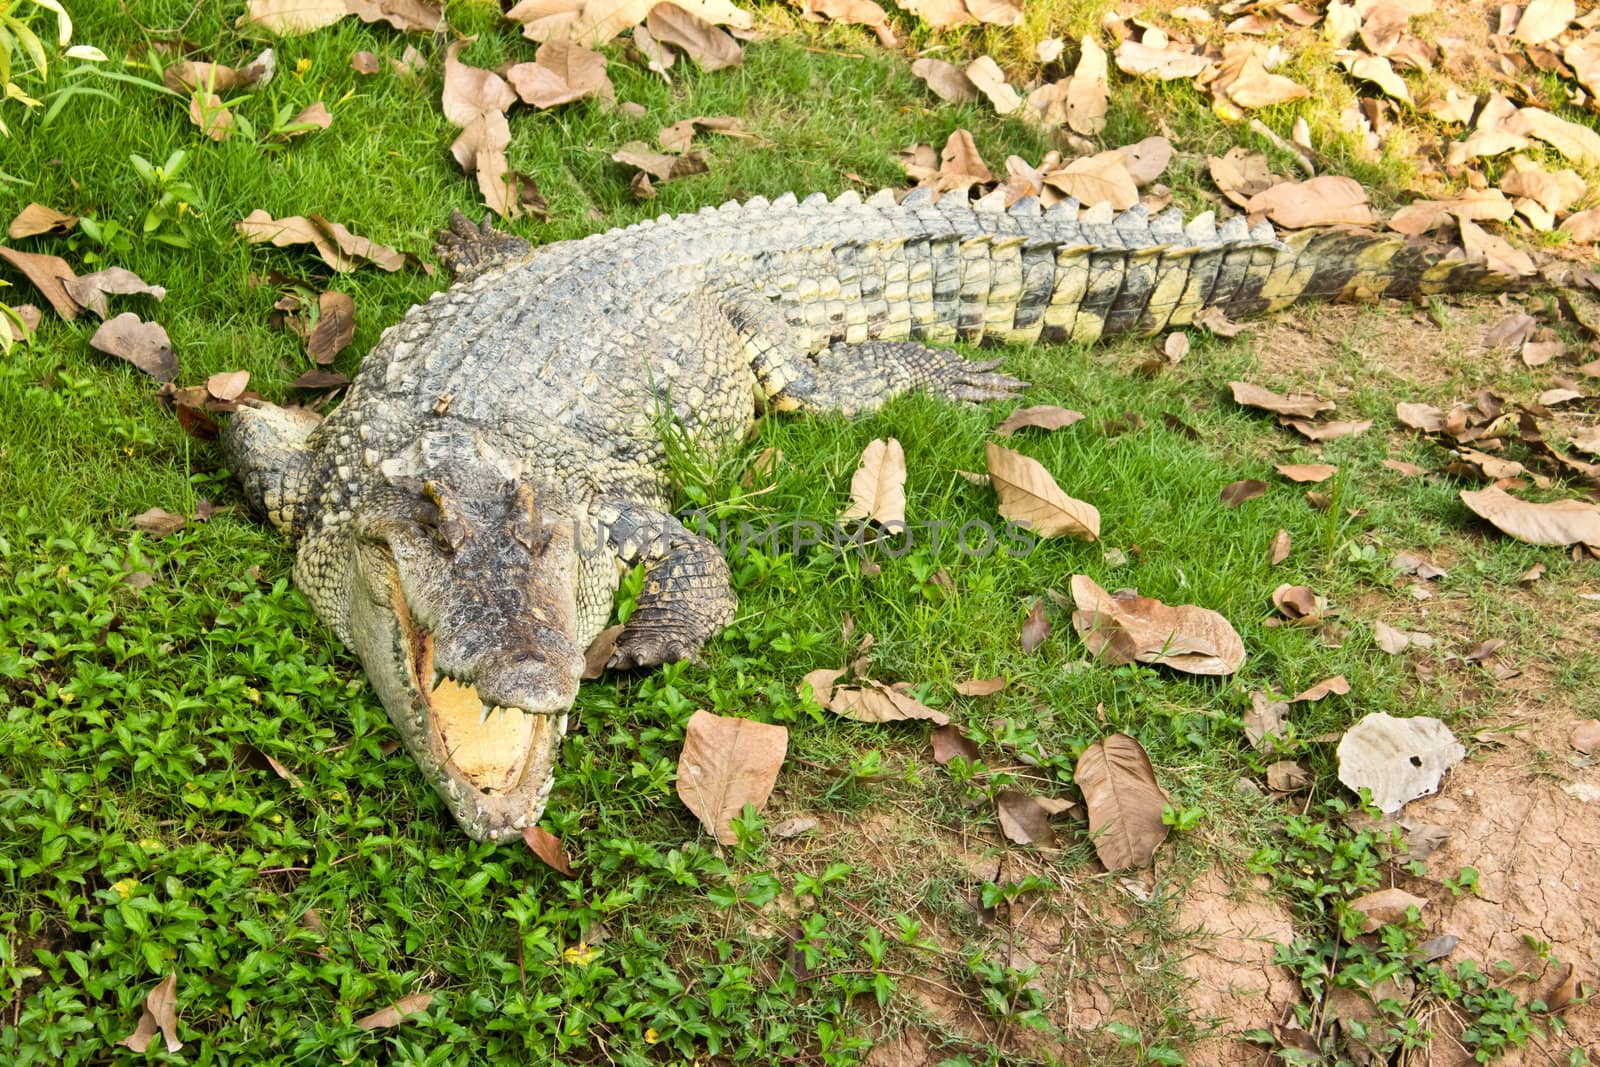 Crocodile opening the mouth resting on the grass